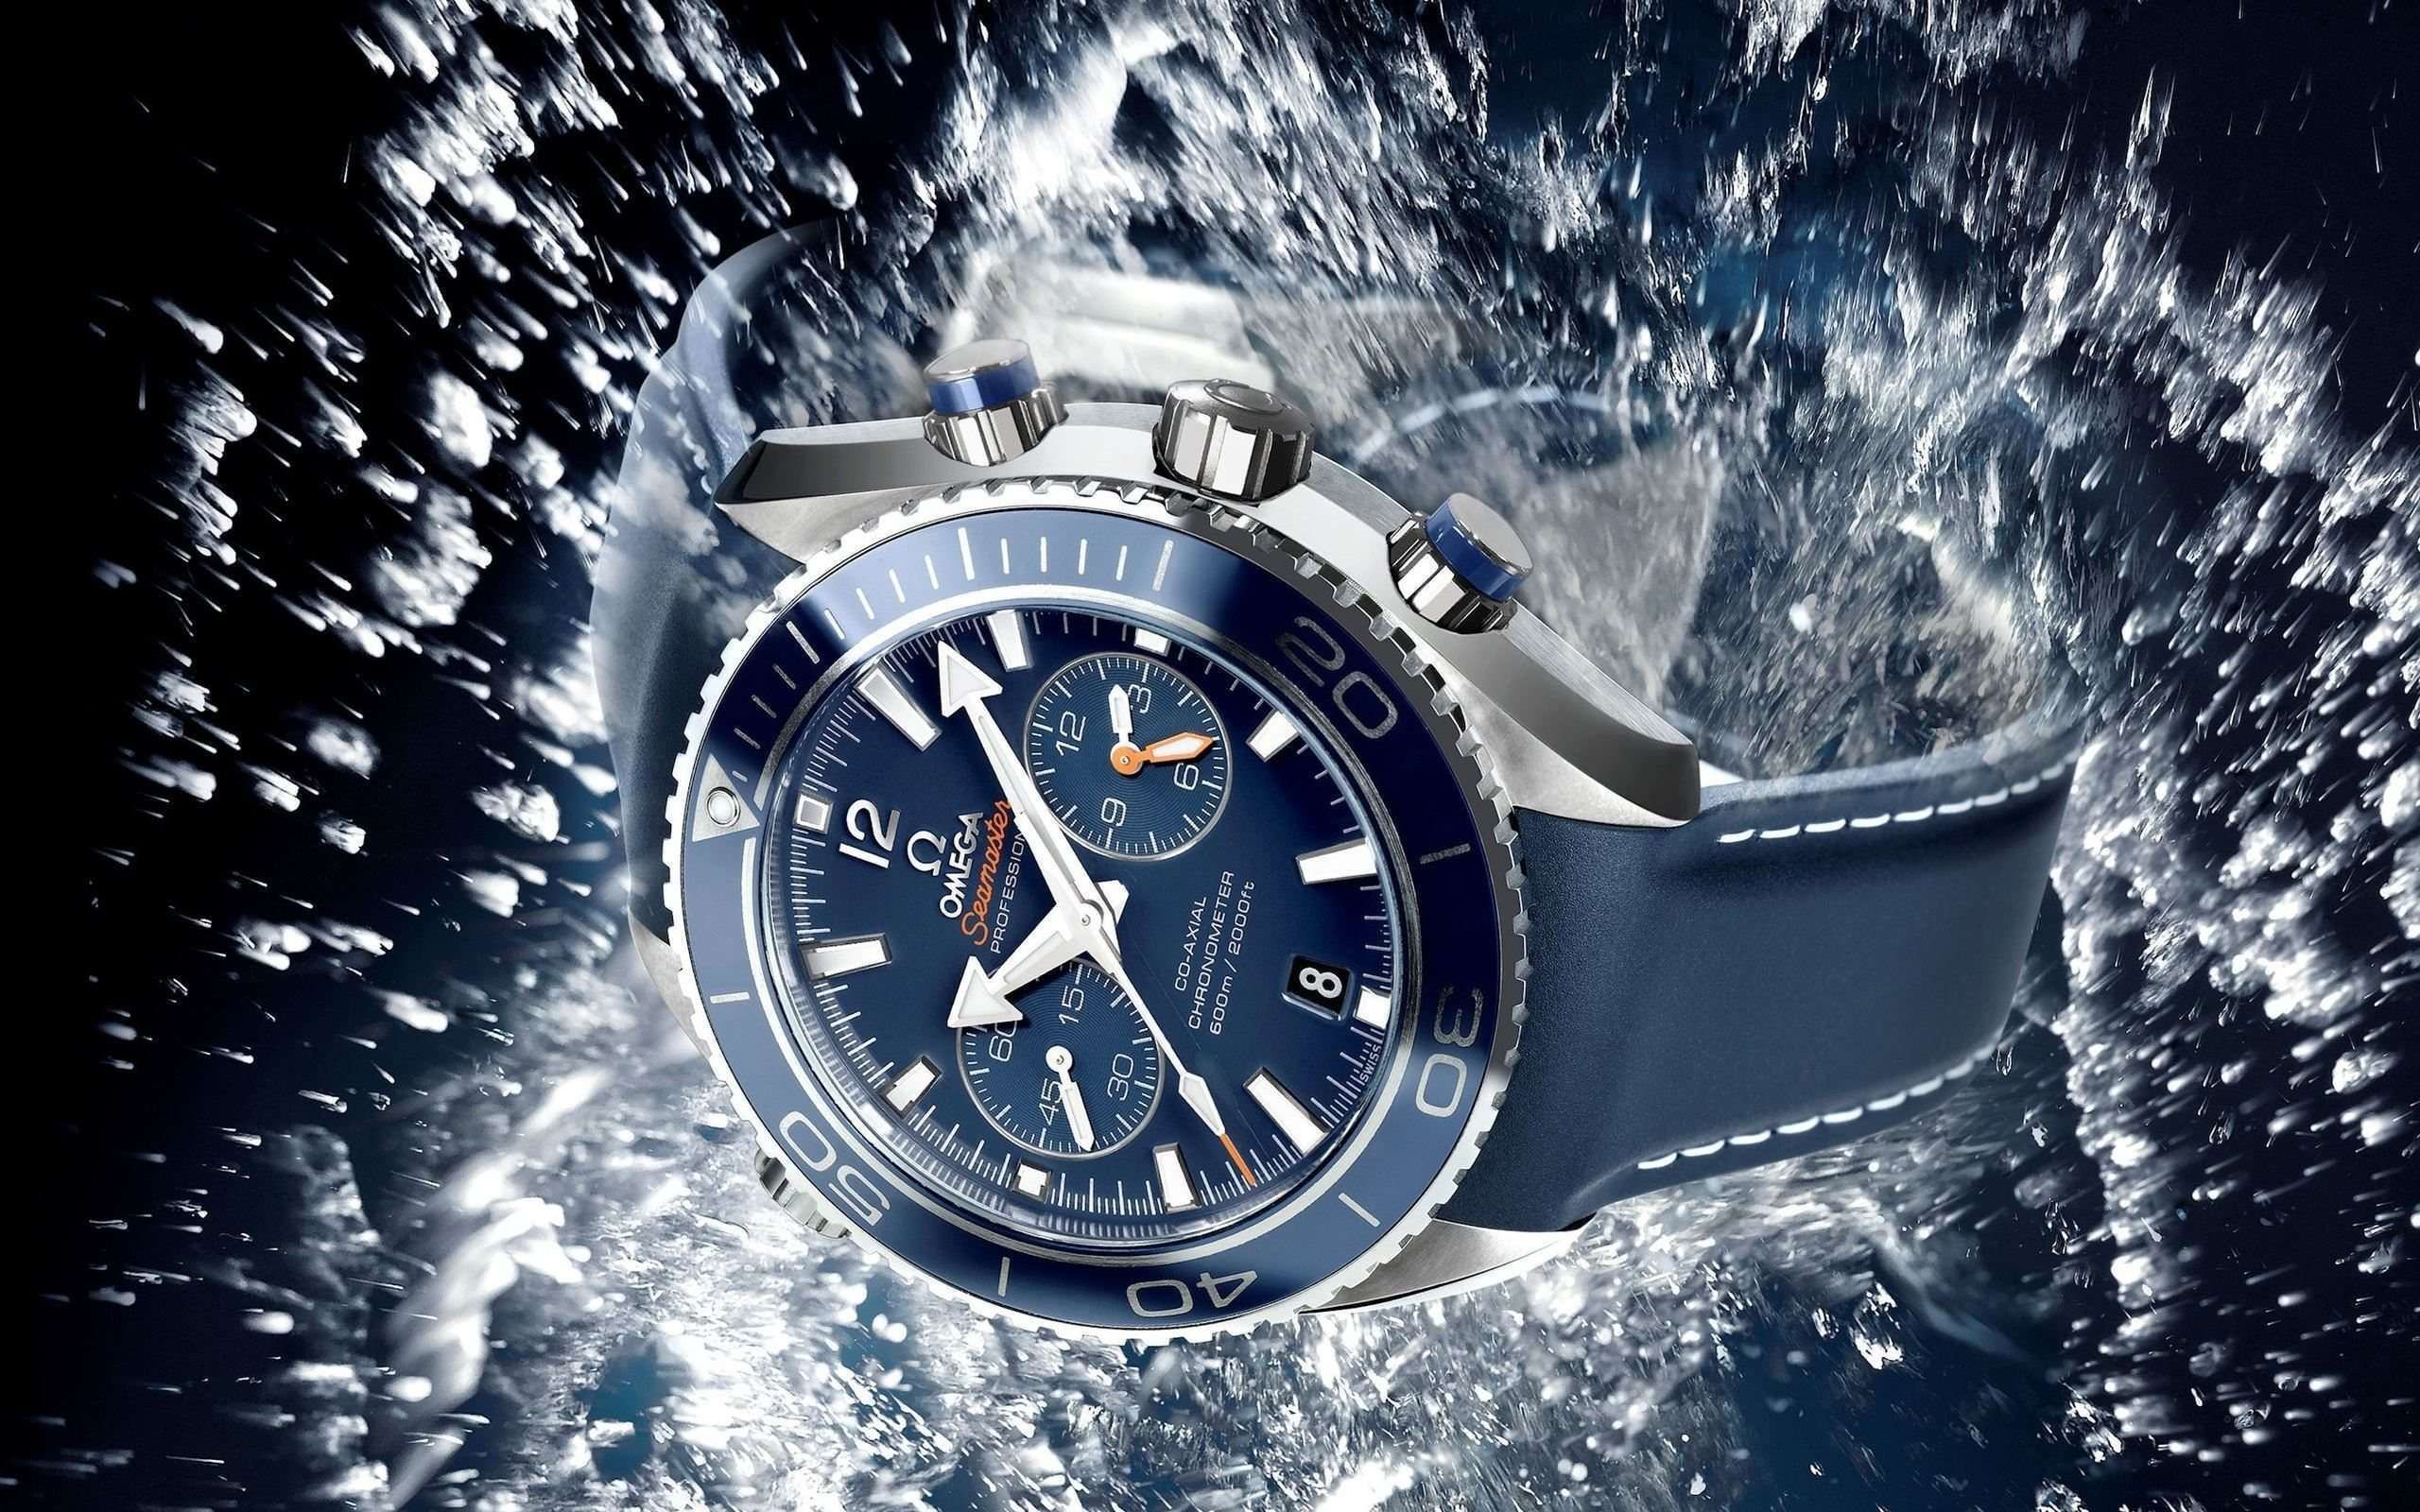 Super Omega Seamaster Wallpaper HD Widescreen. Luxury watches for men, Omega, Accessories 2015